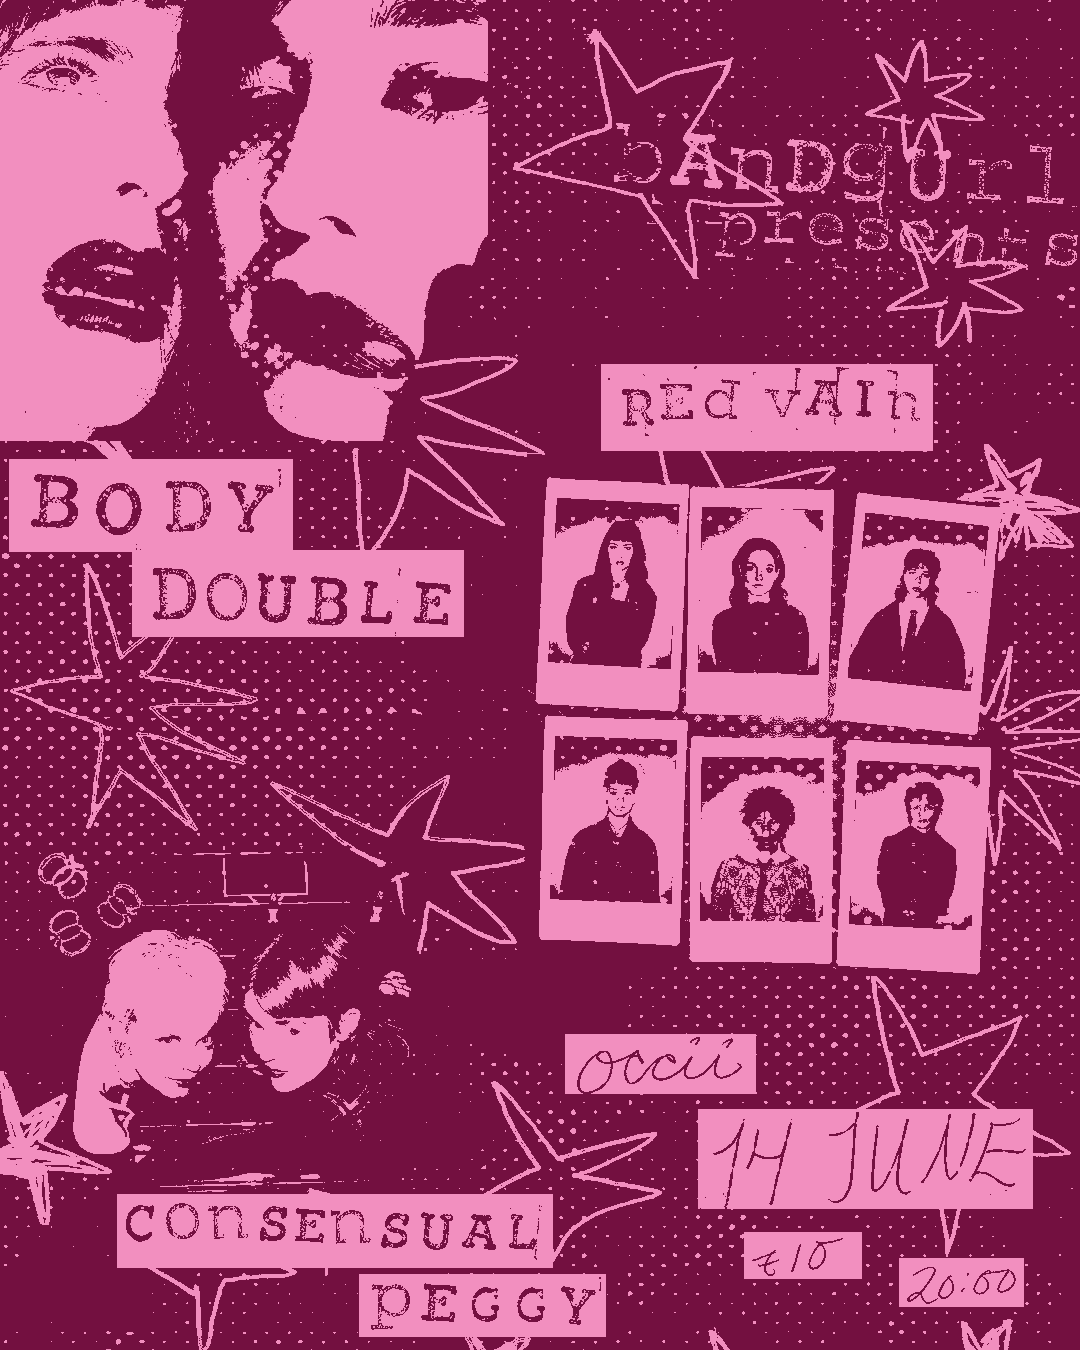 Body Double (US) + Red Vain + Consensual Peggy